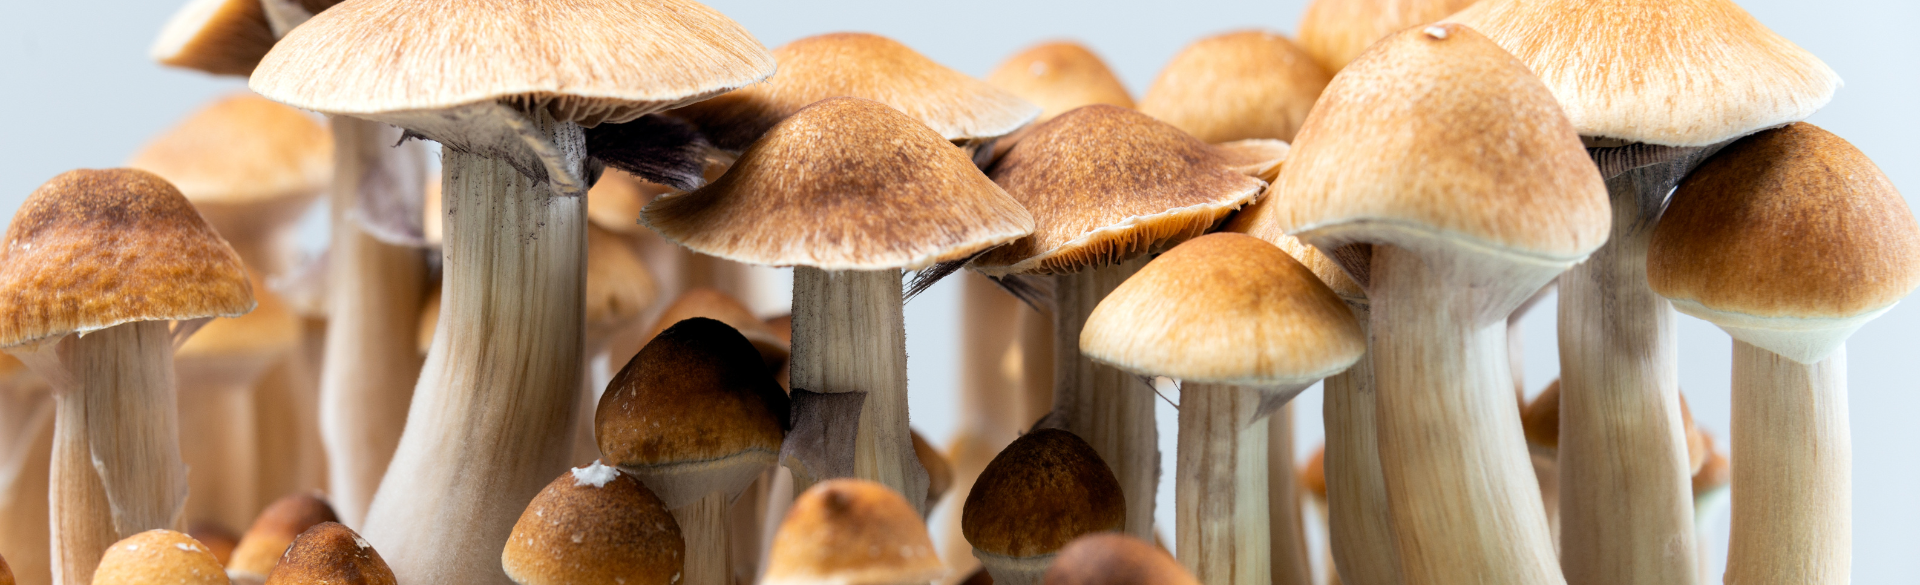 Colorado’s Natural Medicine Health Act, which passed by a narrow margin, allows for the use of mushrooms at state-regulated “healing centers” under the supervision of trained facilitators.